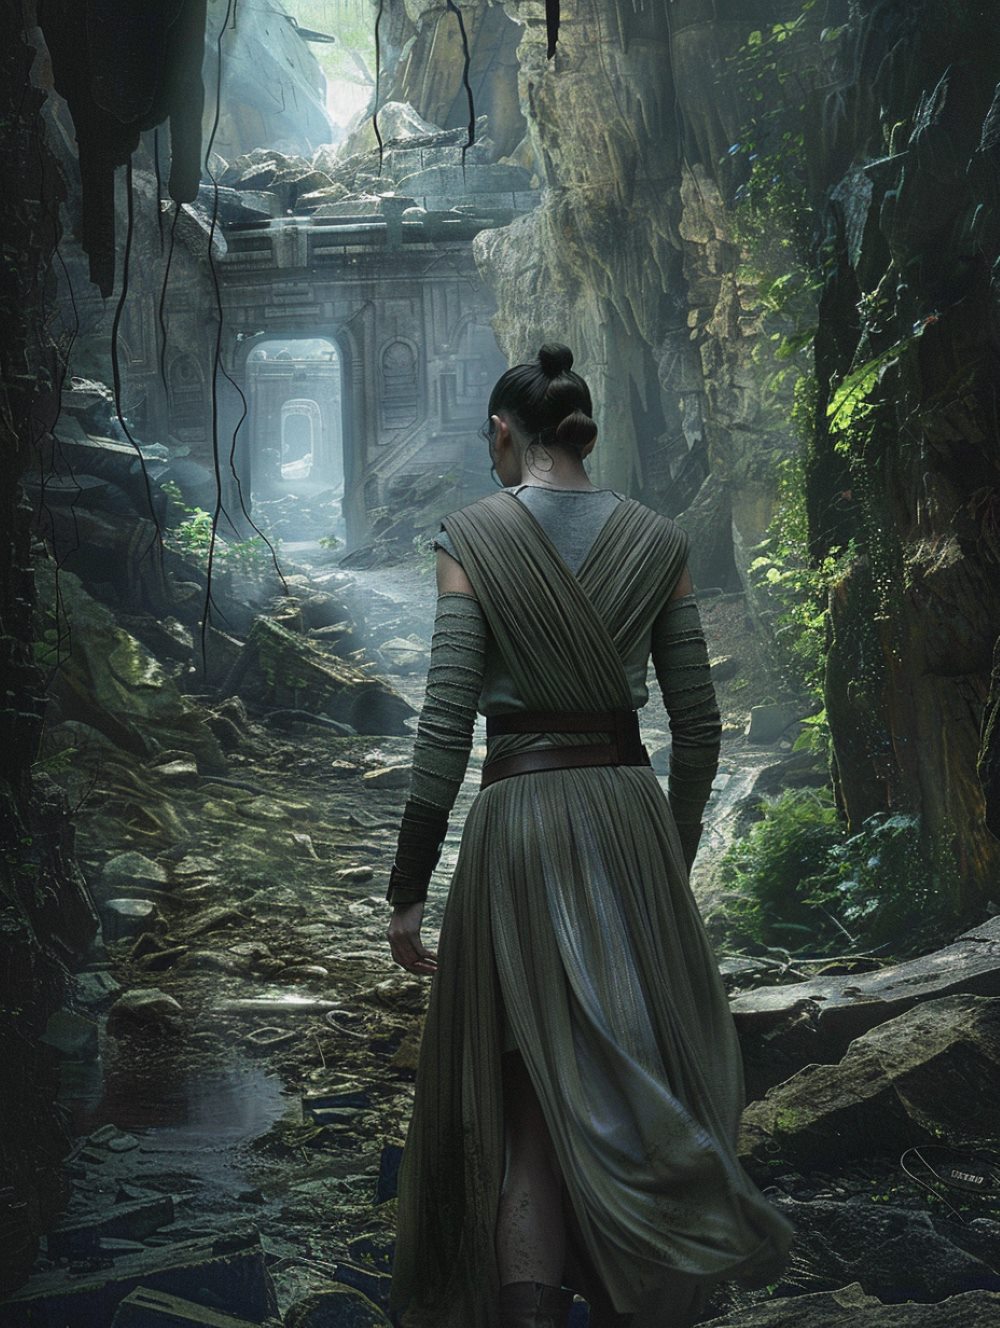 Rey is exploring a Jedi temple remnant